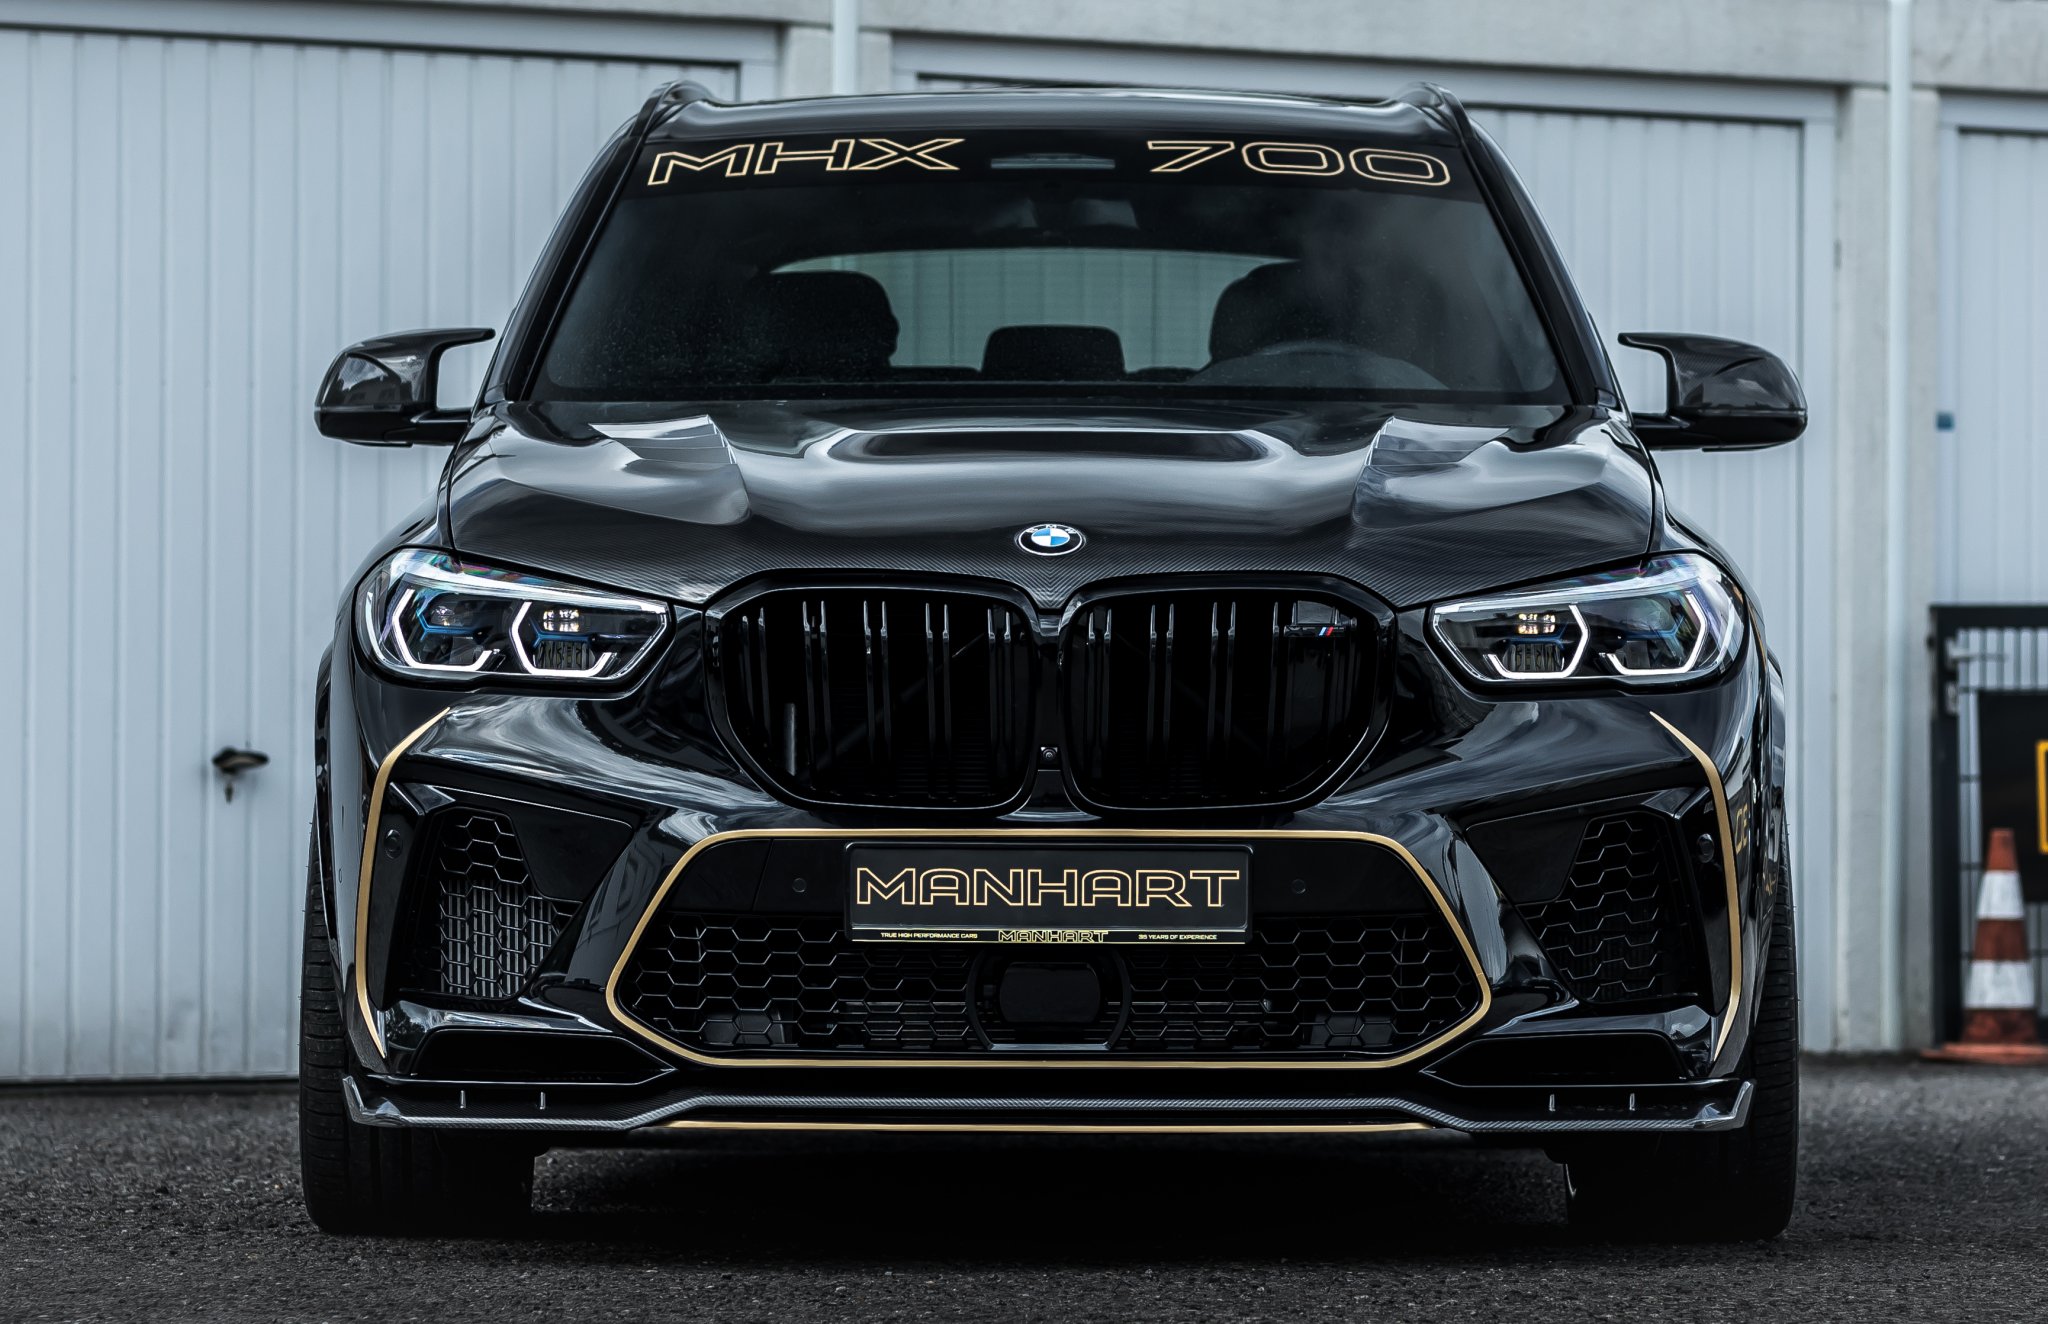 Check our price and buy an Manhart carbon fiber body kit for BMW X5 M F95!